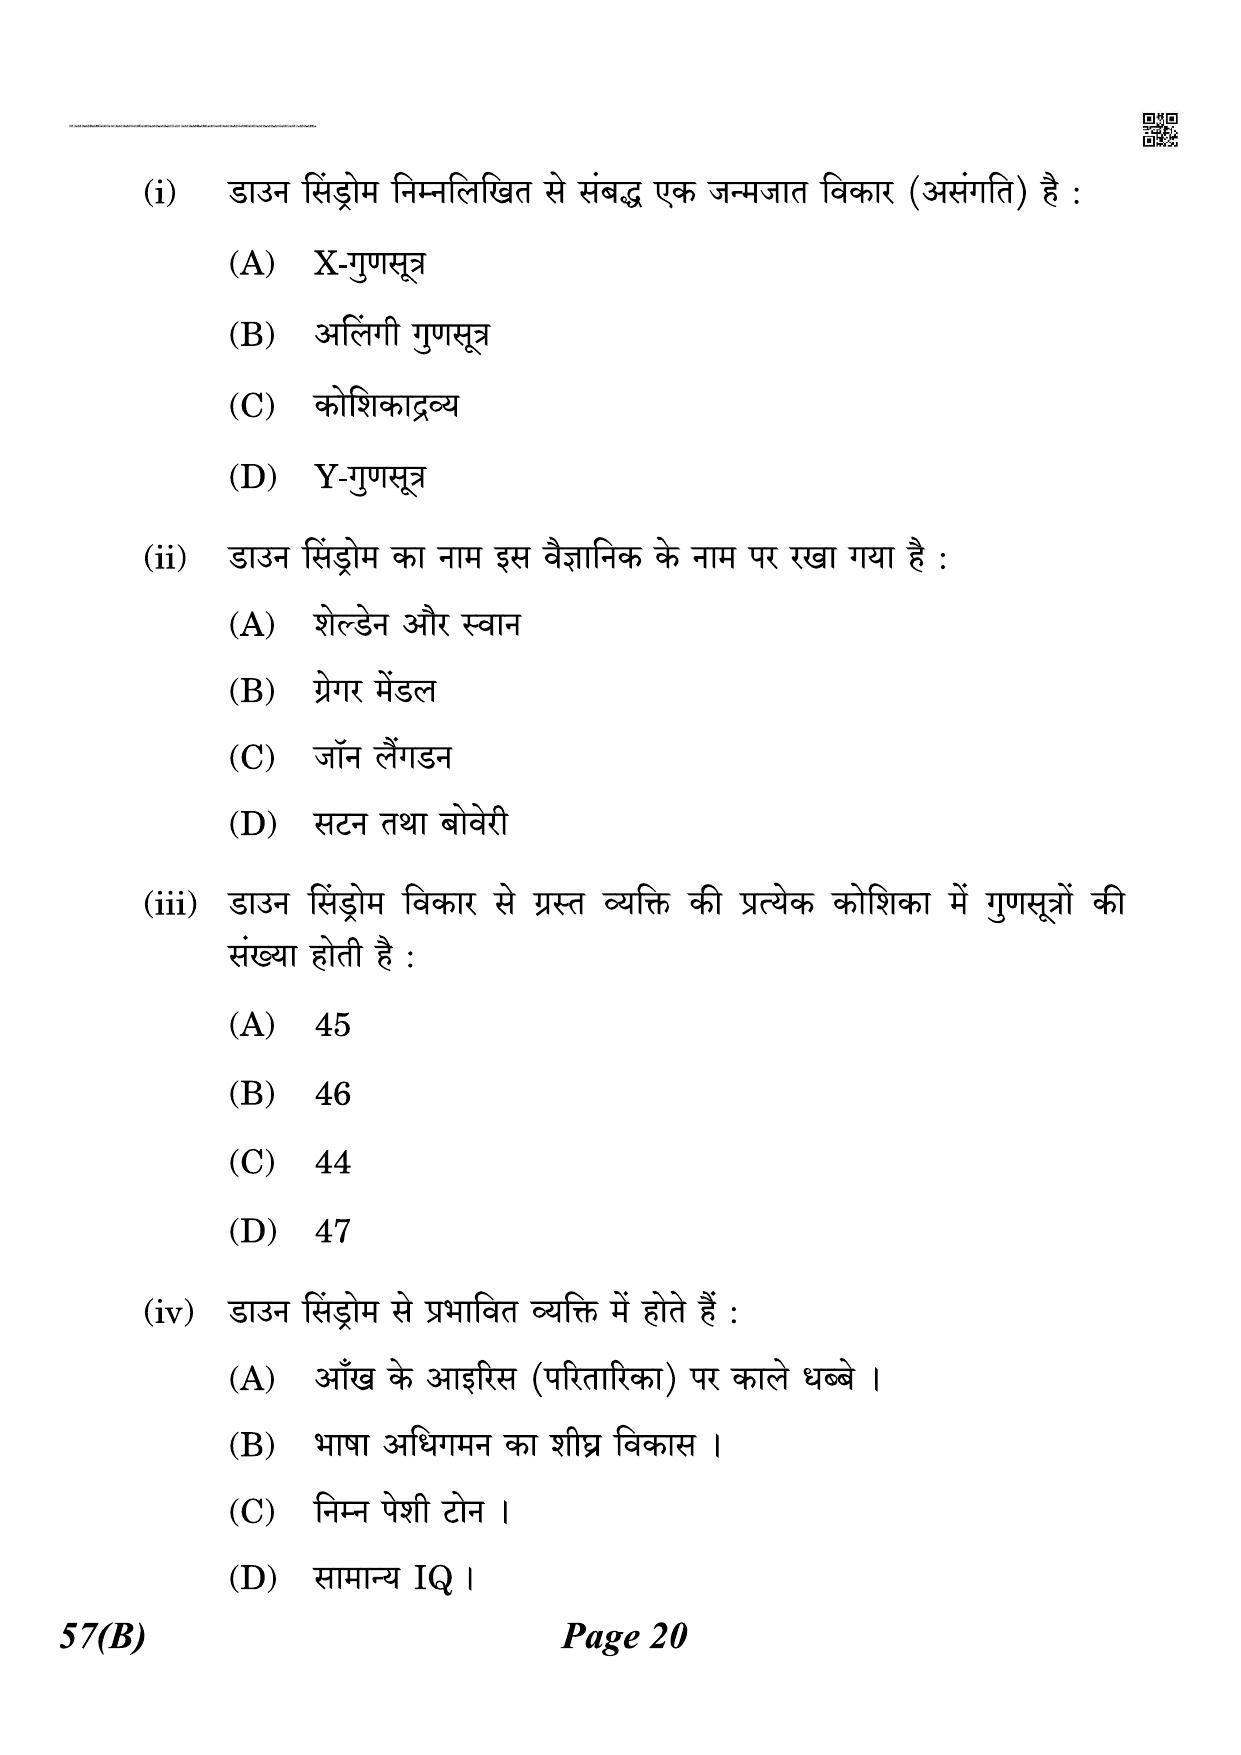 CBSE Class 12 QP_044_biology_for_visually_impared_candidates 2021 Compartment Question Paper - Page 20